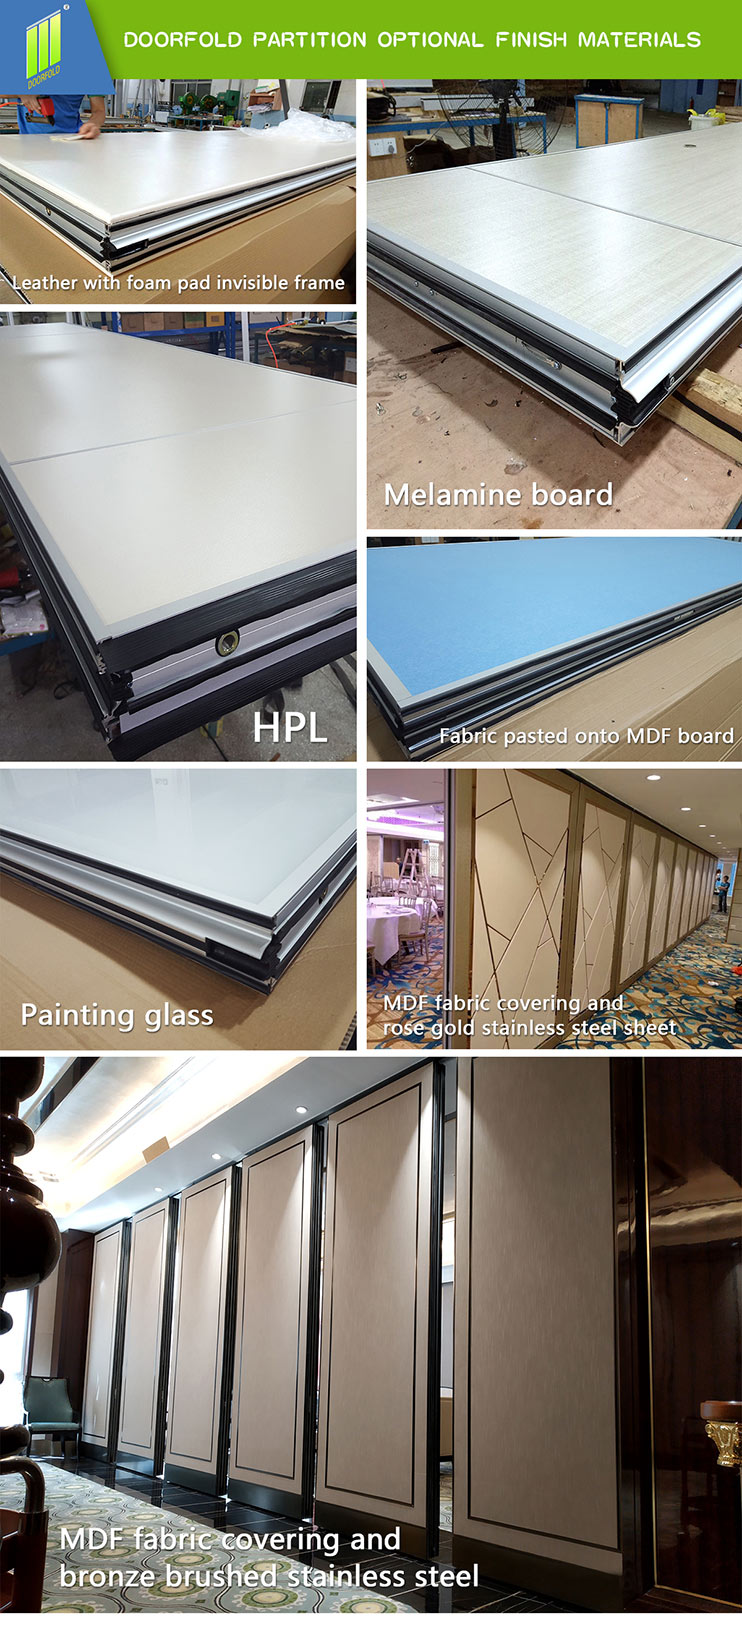 Doorfold decorative hall acoustic movable partitions made in china conference-10